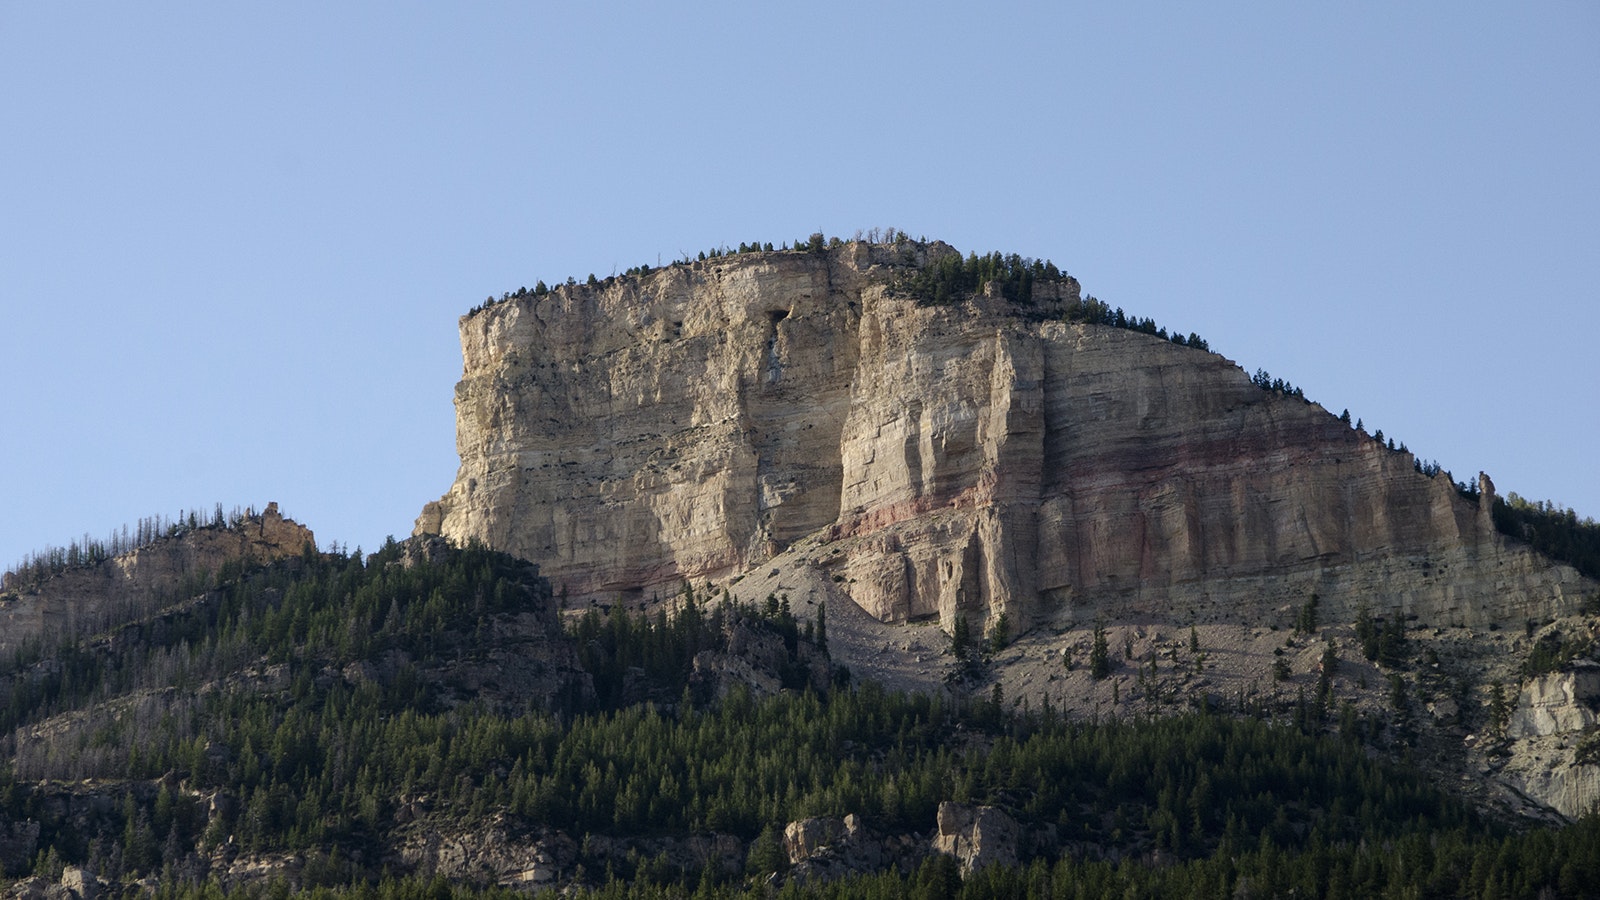 Copman's Tomb is a distinctive feature in the Bighorn Basin